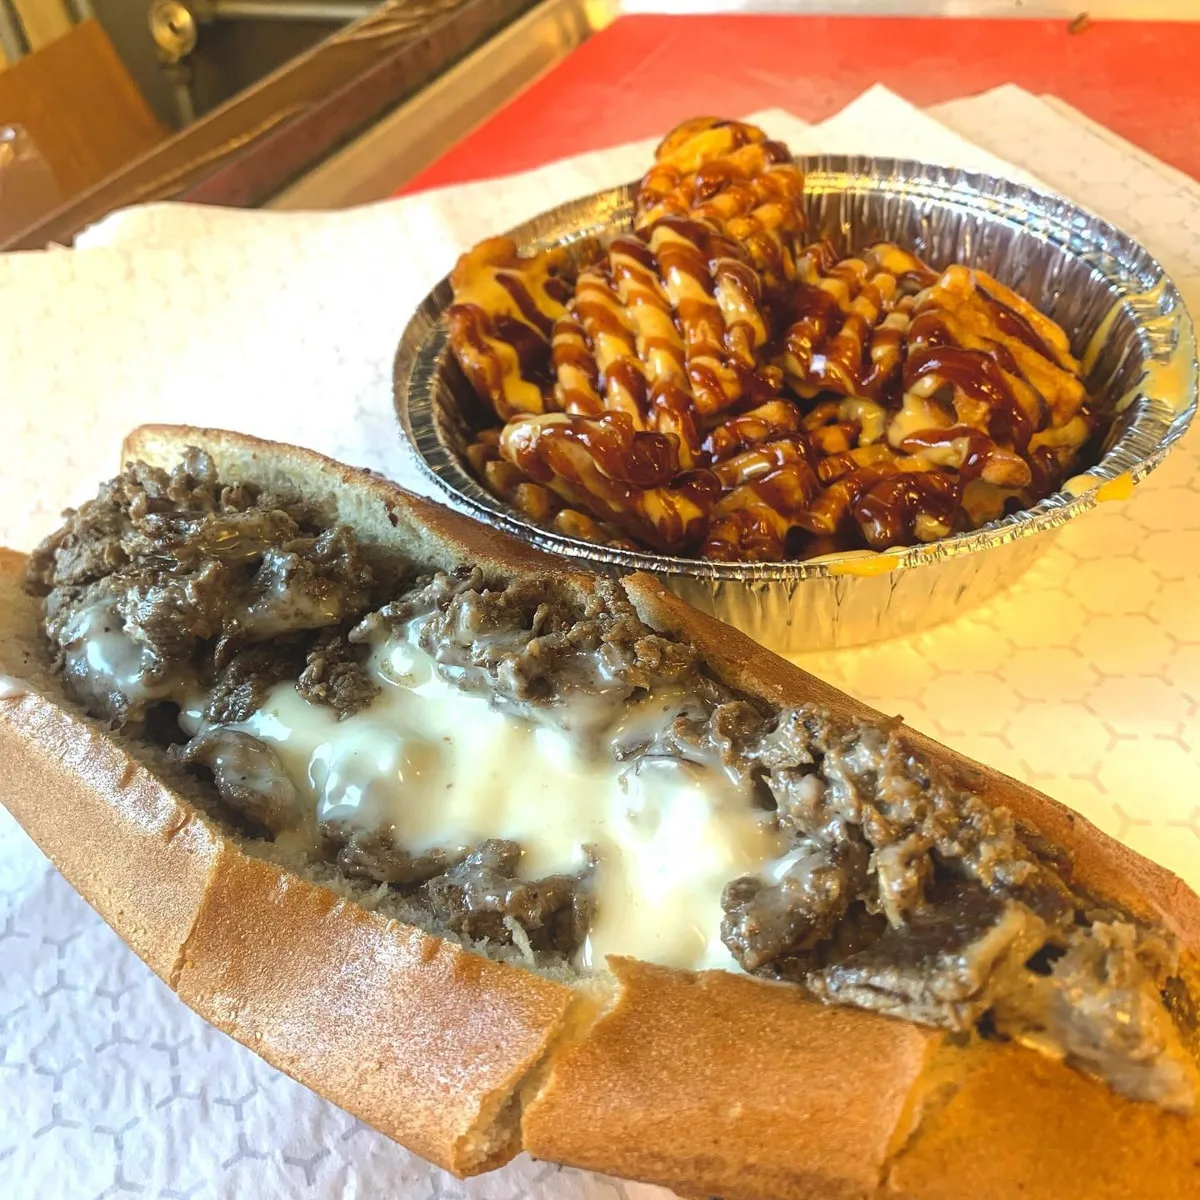 Philly Cheesesteak and fries from Alley Kat Food Truck Johnson City tn 